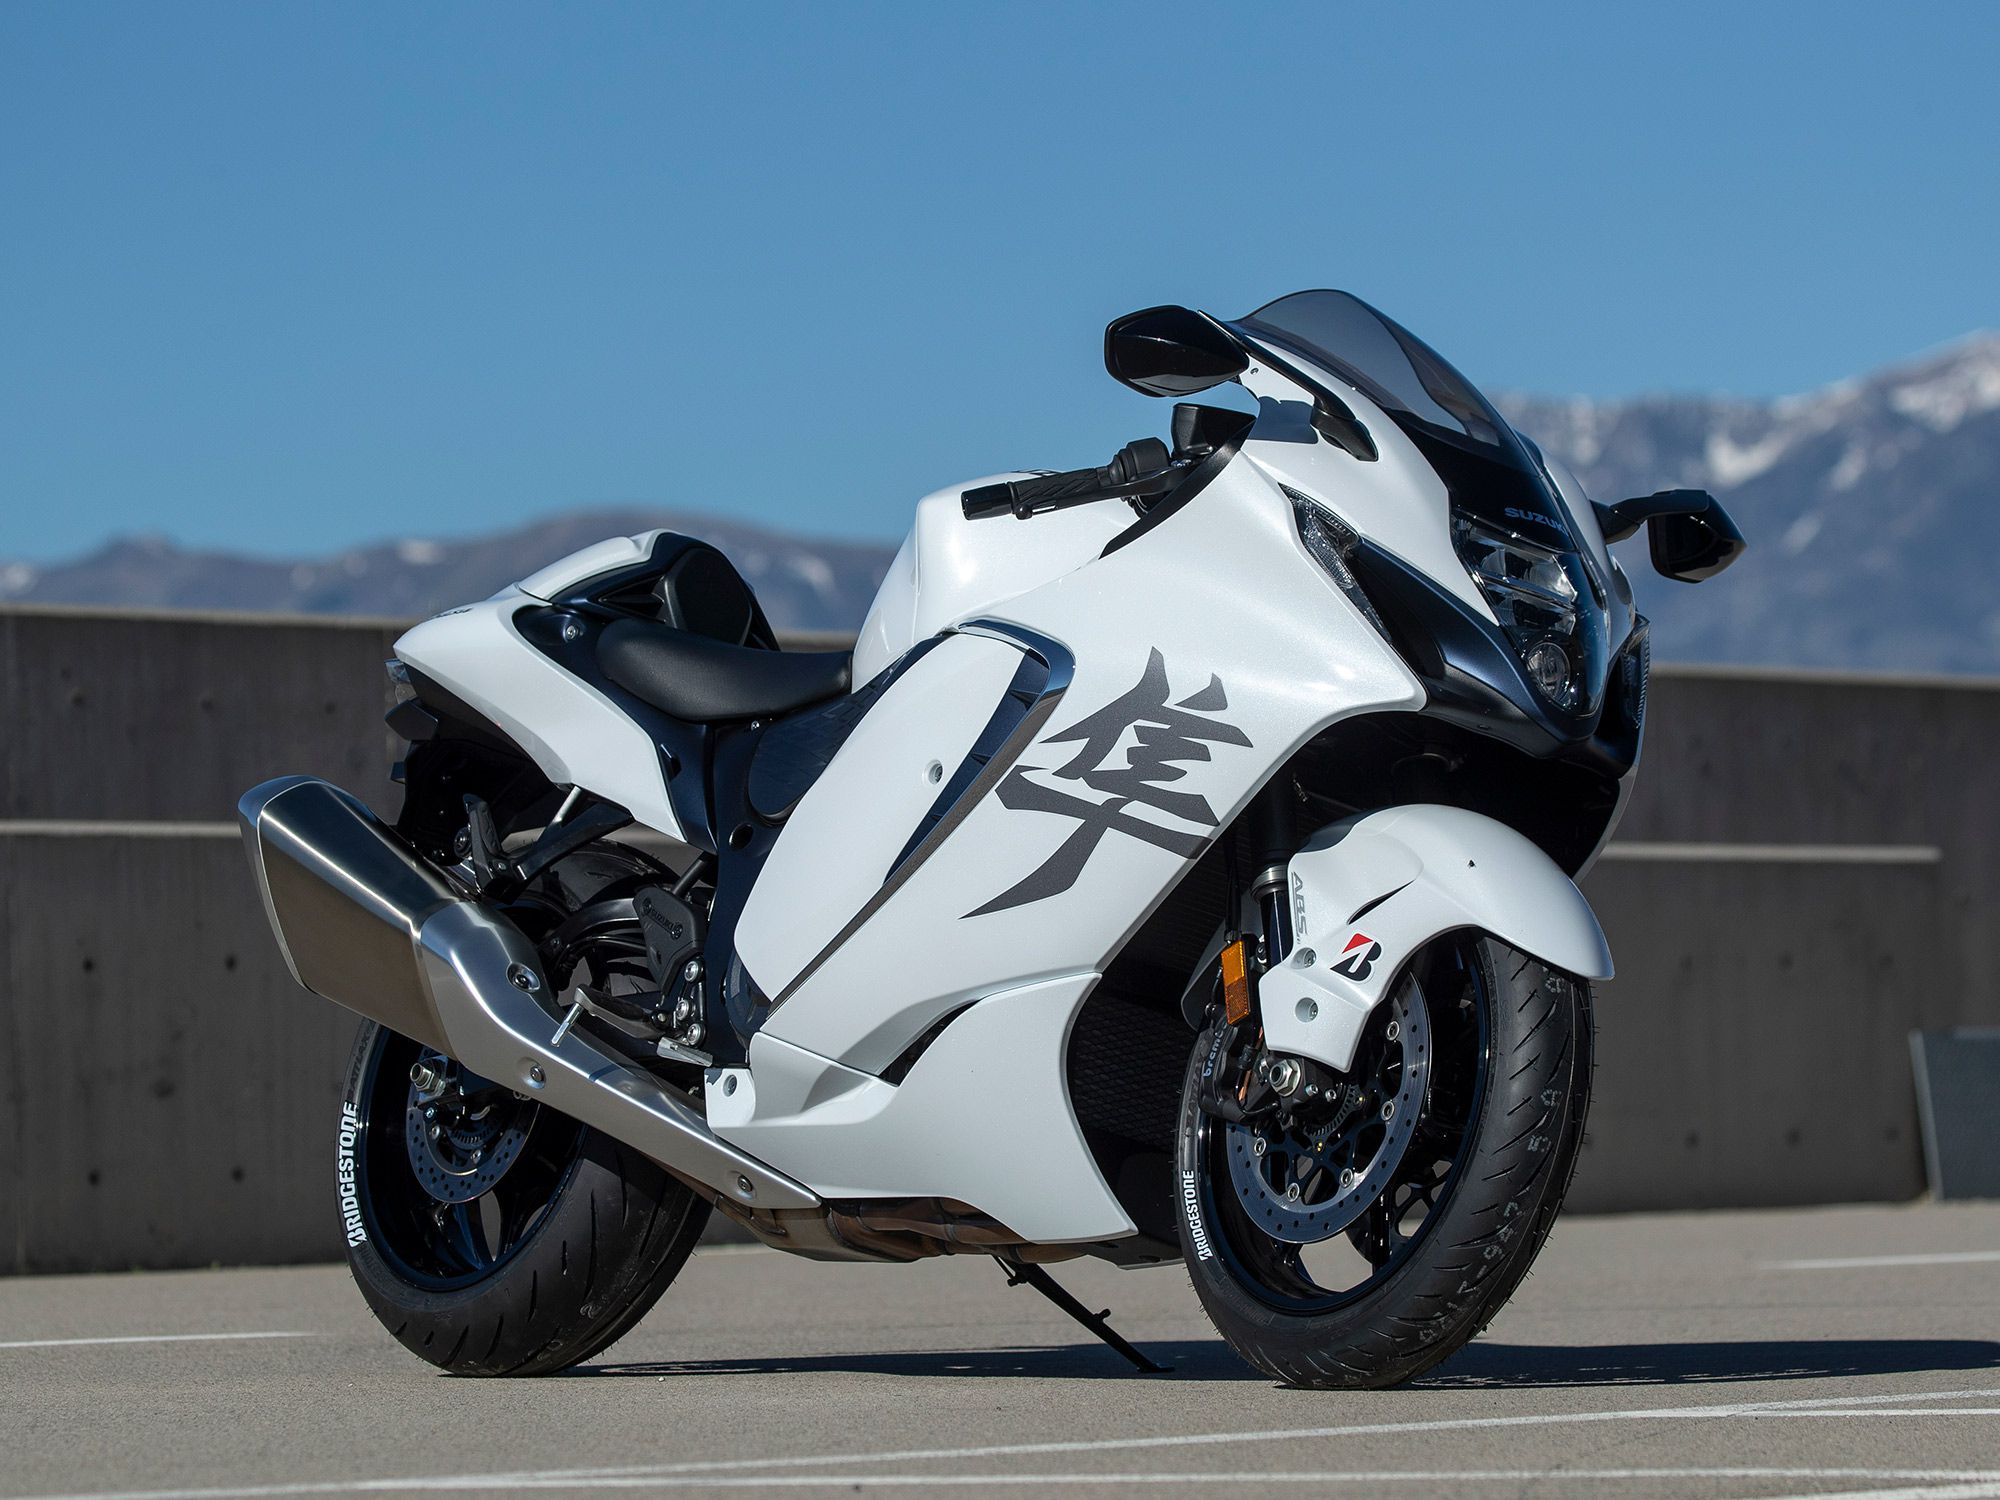 The 2022 Hayabusa (18,599) represents the top of the spear in Suzuki’s current motorcycle model lineup.